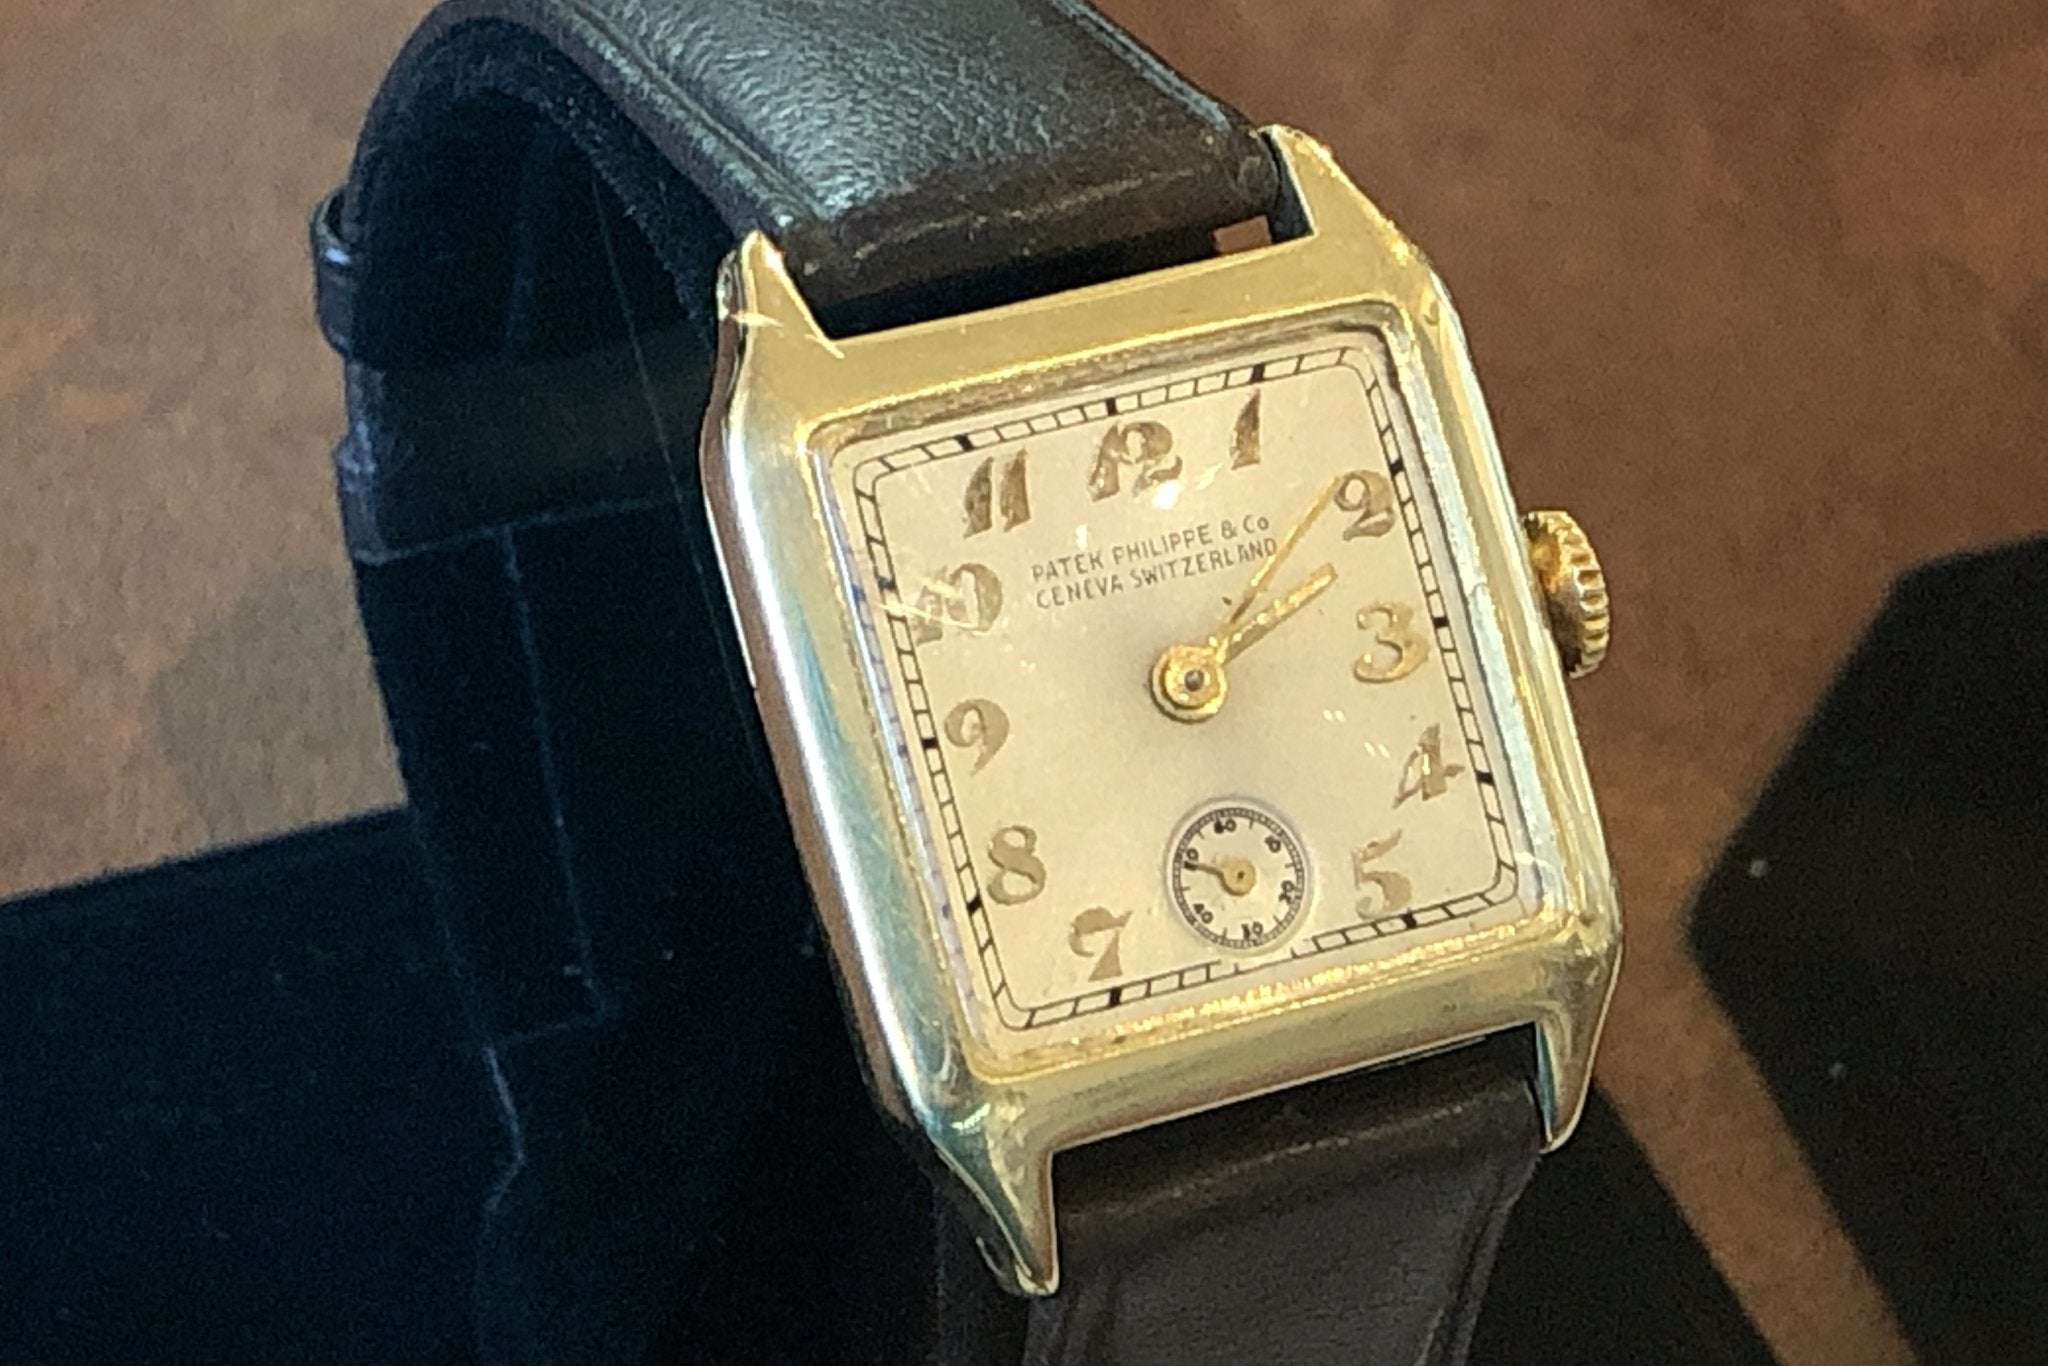 Patek Philippe: The Ultimate Watchmaker